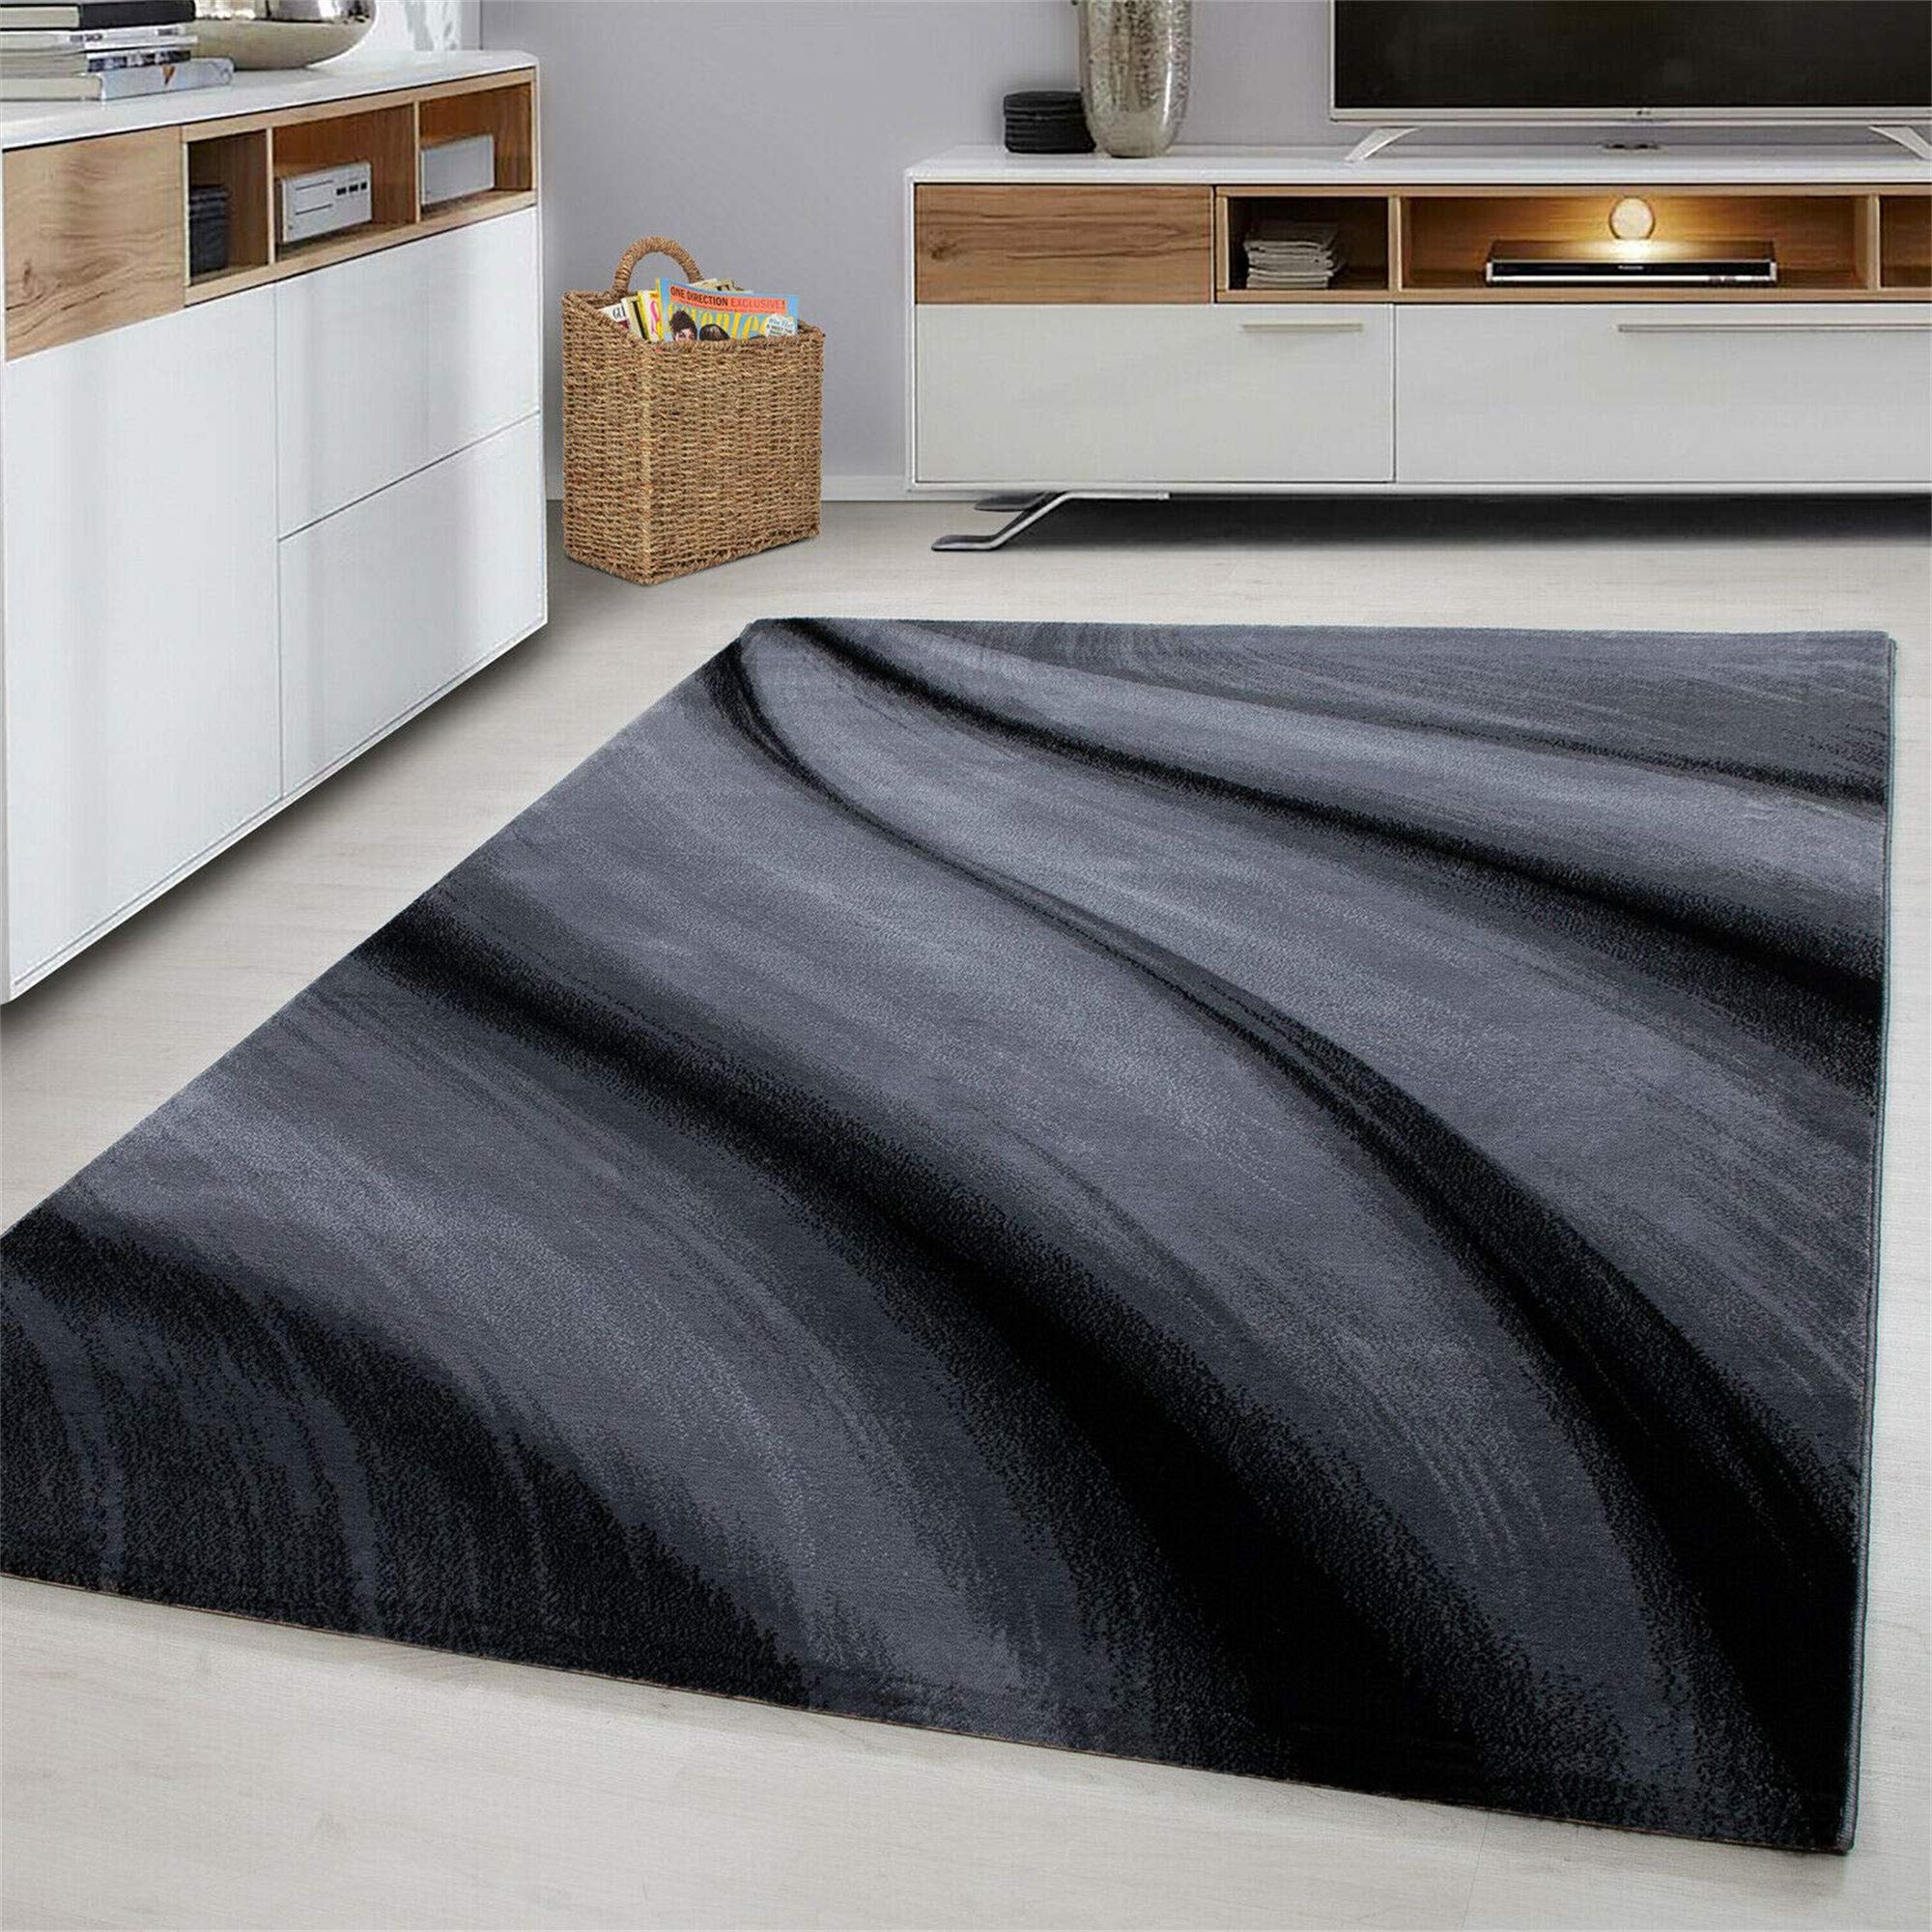 Ivy Bronx Modern Design Black Grey Charcoal Rugs Living Room Extra Large  Size Soft Touch Short Pile Style Carpet Area Rugs Non Shedding (160Cm X  220Cm (5.5Ft X 7.2Ft)) | Wayfair.co.uk Pertaining To Charcoal Rugs (Photo 11 of 15)